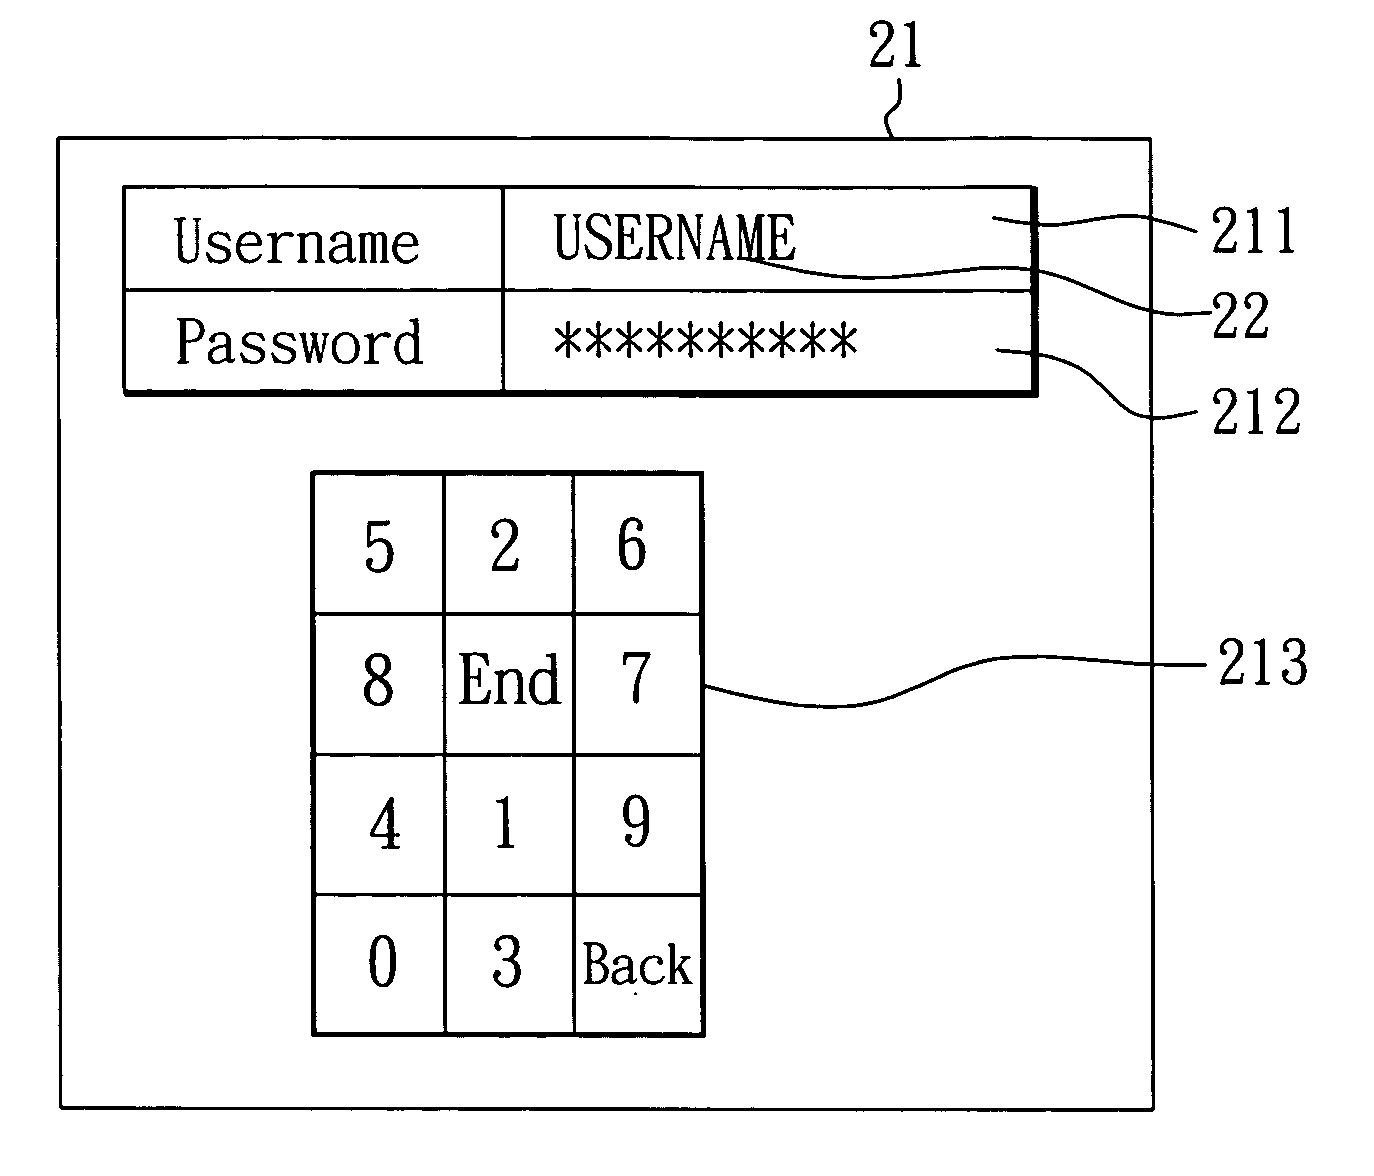 Logon system for an electronic device